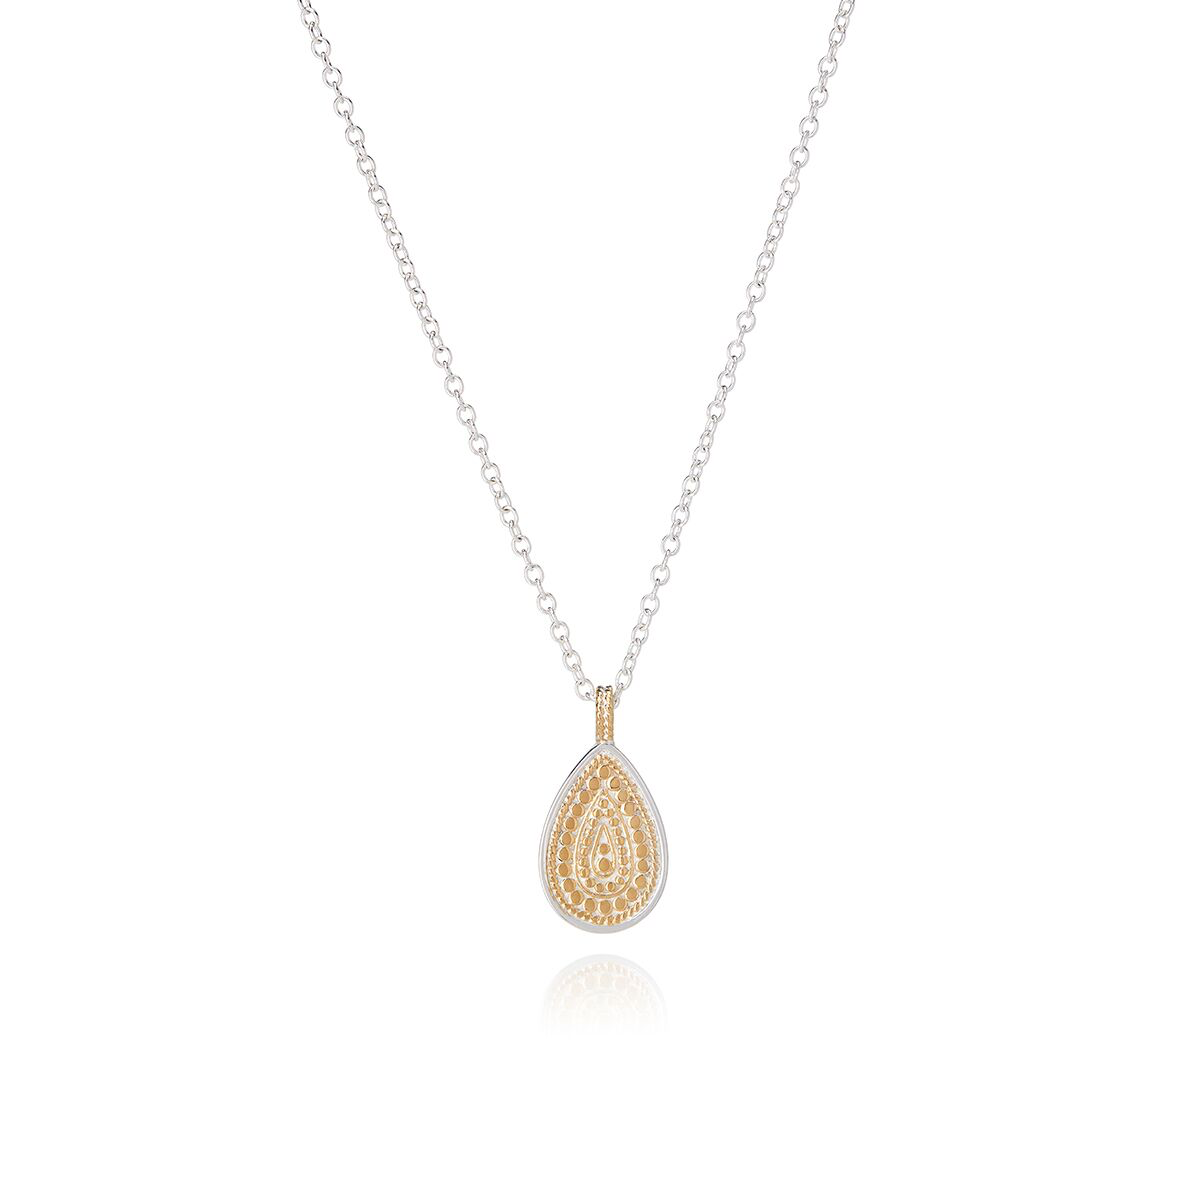 Anna Beck Gold and Silver Single Teardrop Necklace